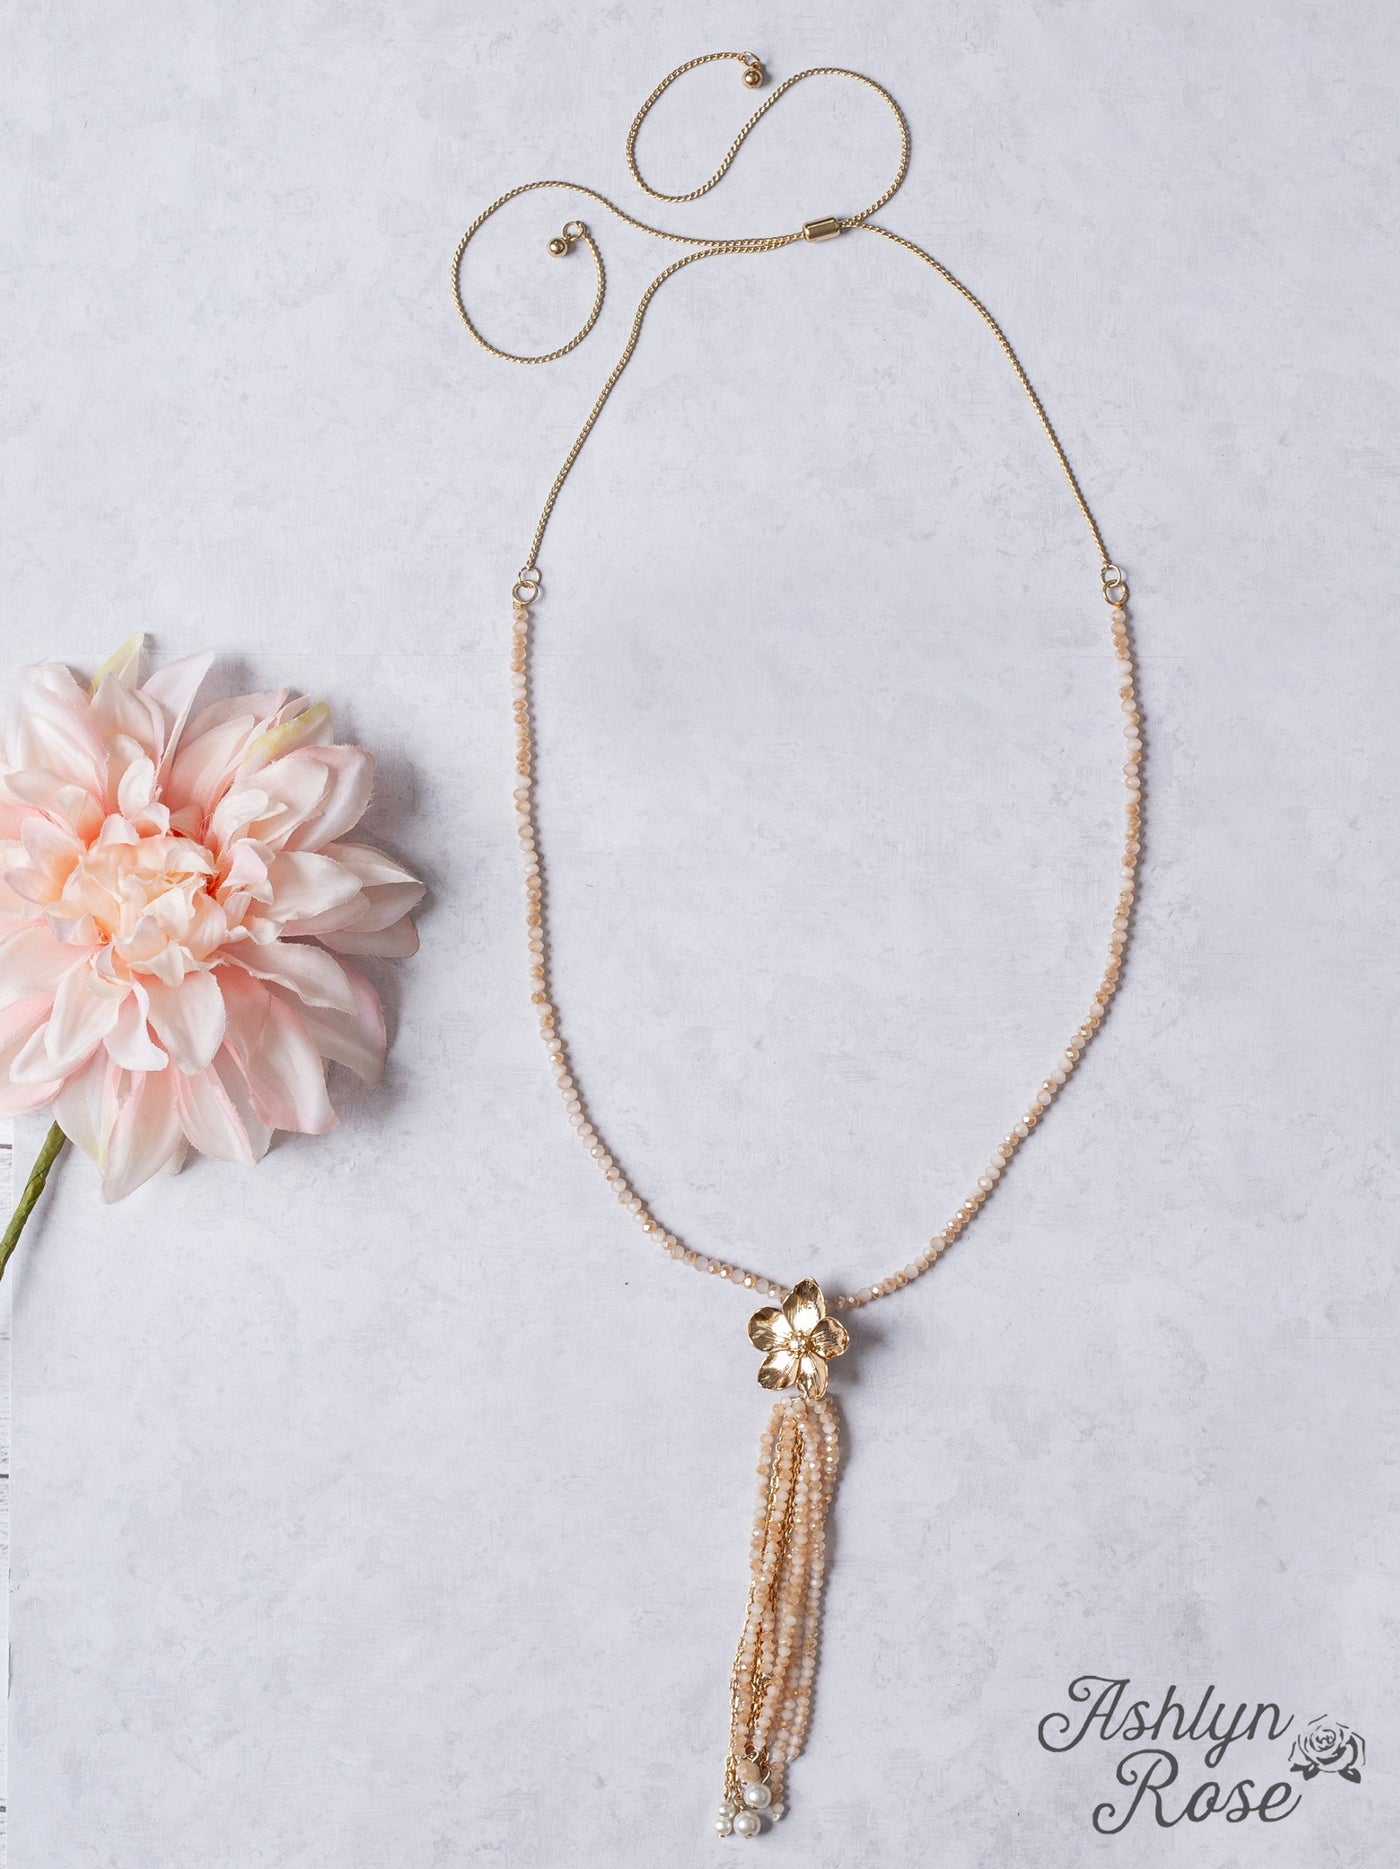 IMPRESS ME GOLD FLOWER TASSEL PENDANT ON A ROSY TAN CRYSTAL BEADED NECKLACE